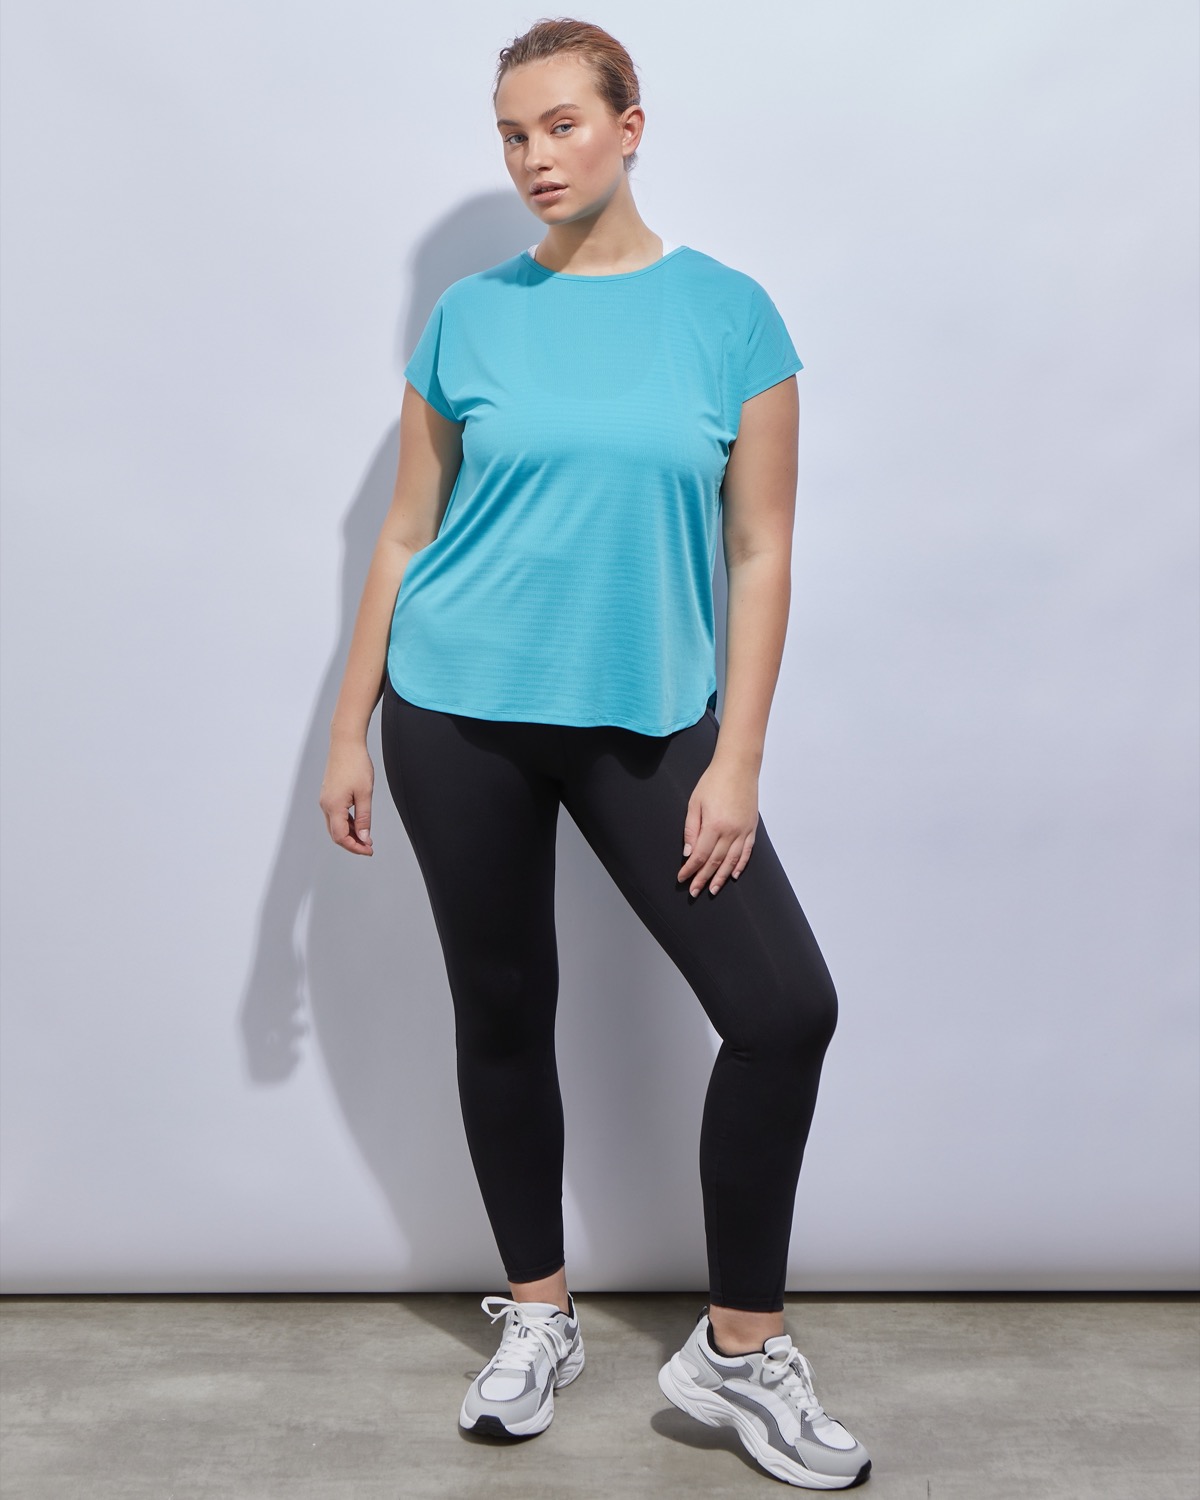 Why We're Loving The New Dunnes Stores Gym Gear Range